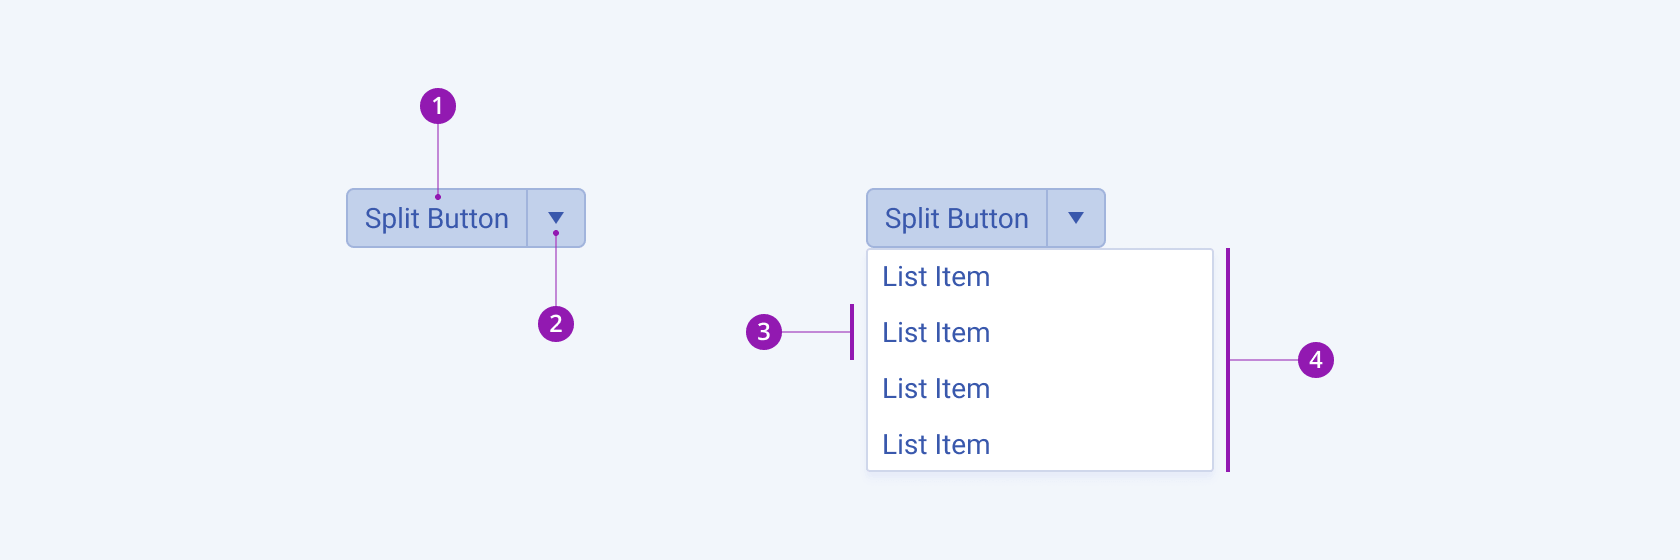 A Telerik and Kendo UI SplitButton component in its normal and expanded state, consisting of a button, icon button, and drop-down list.